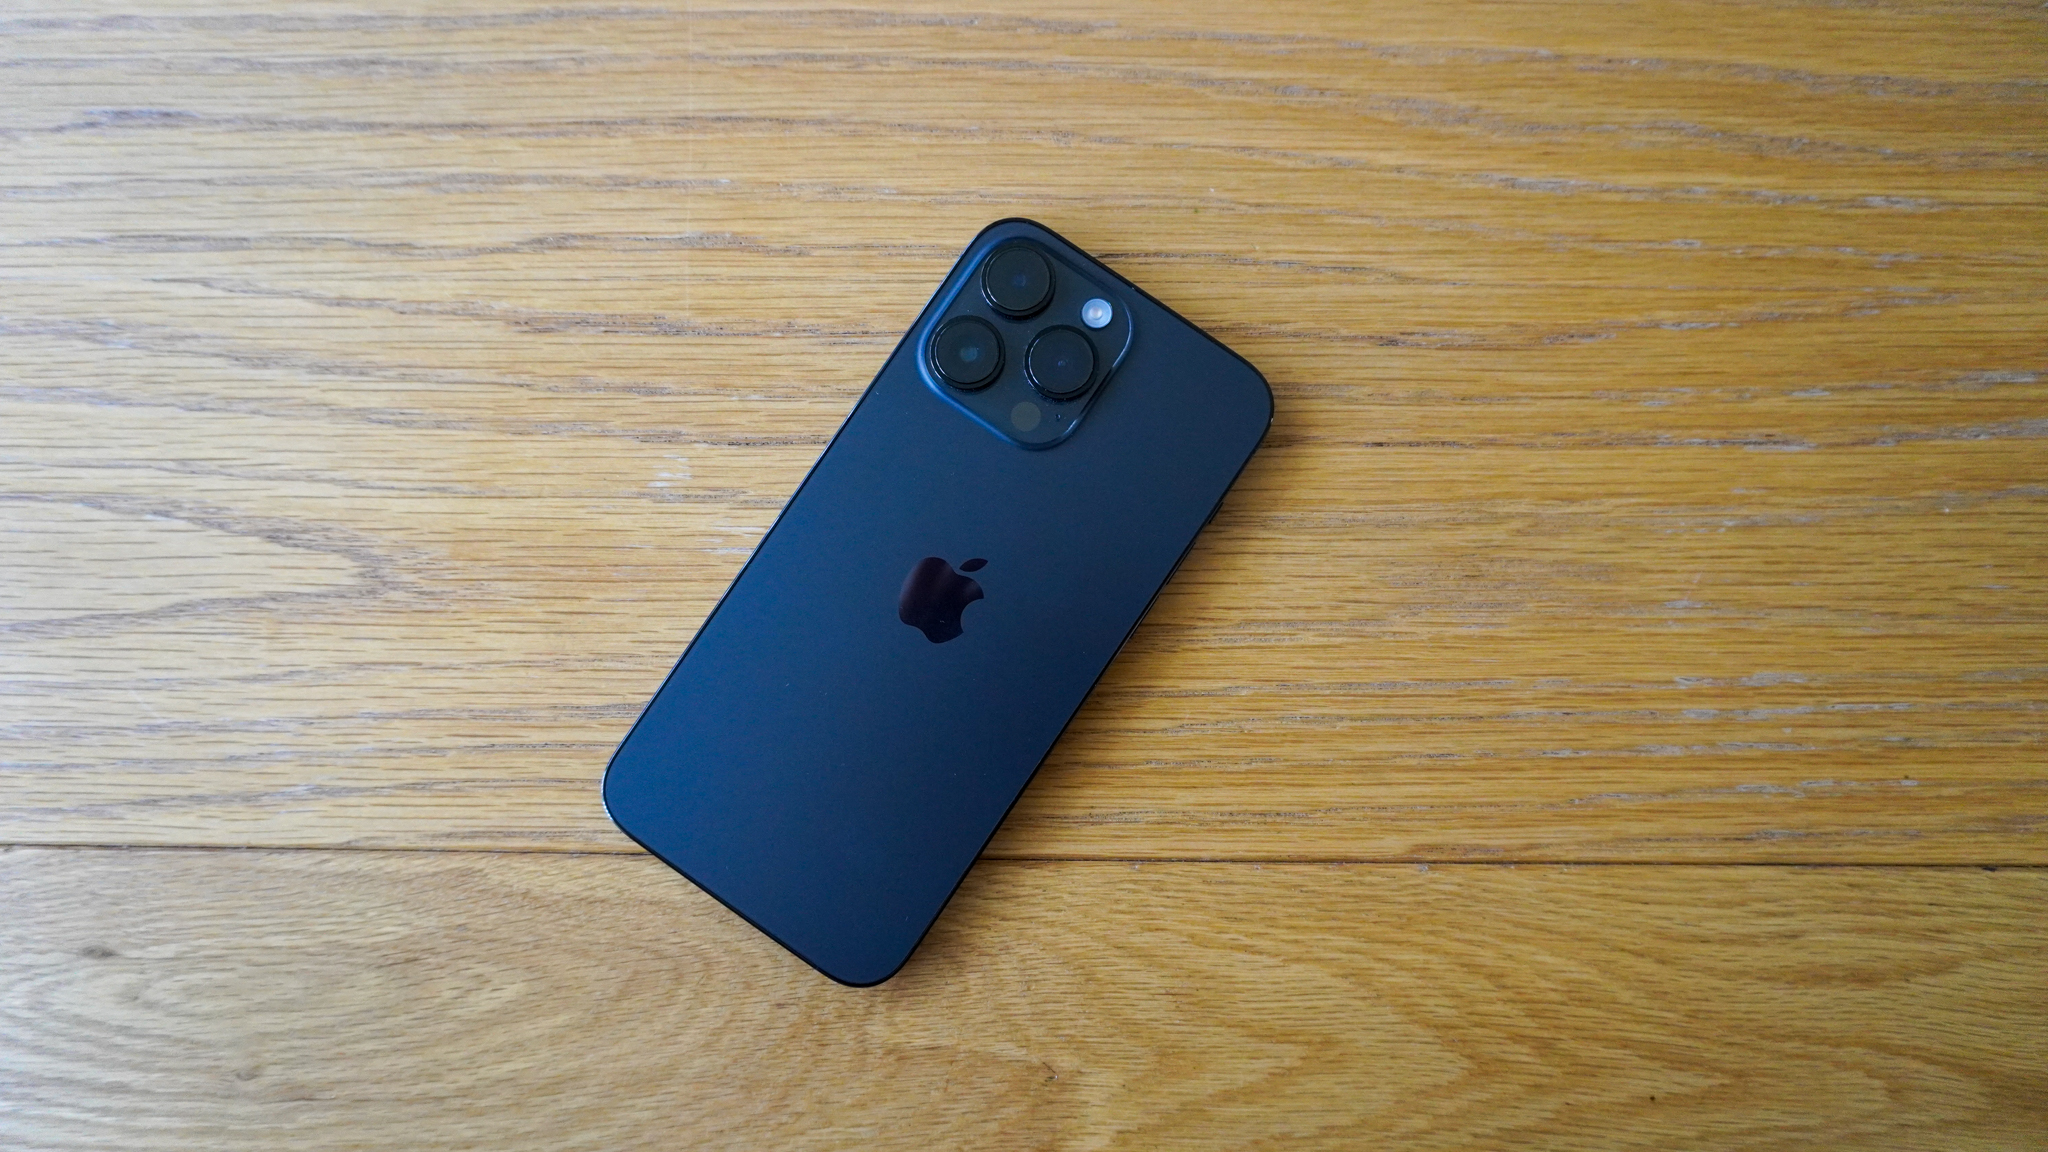 The Latest iPhone 14 Pro Max: An In-Depth Review